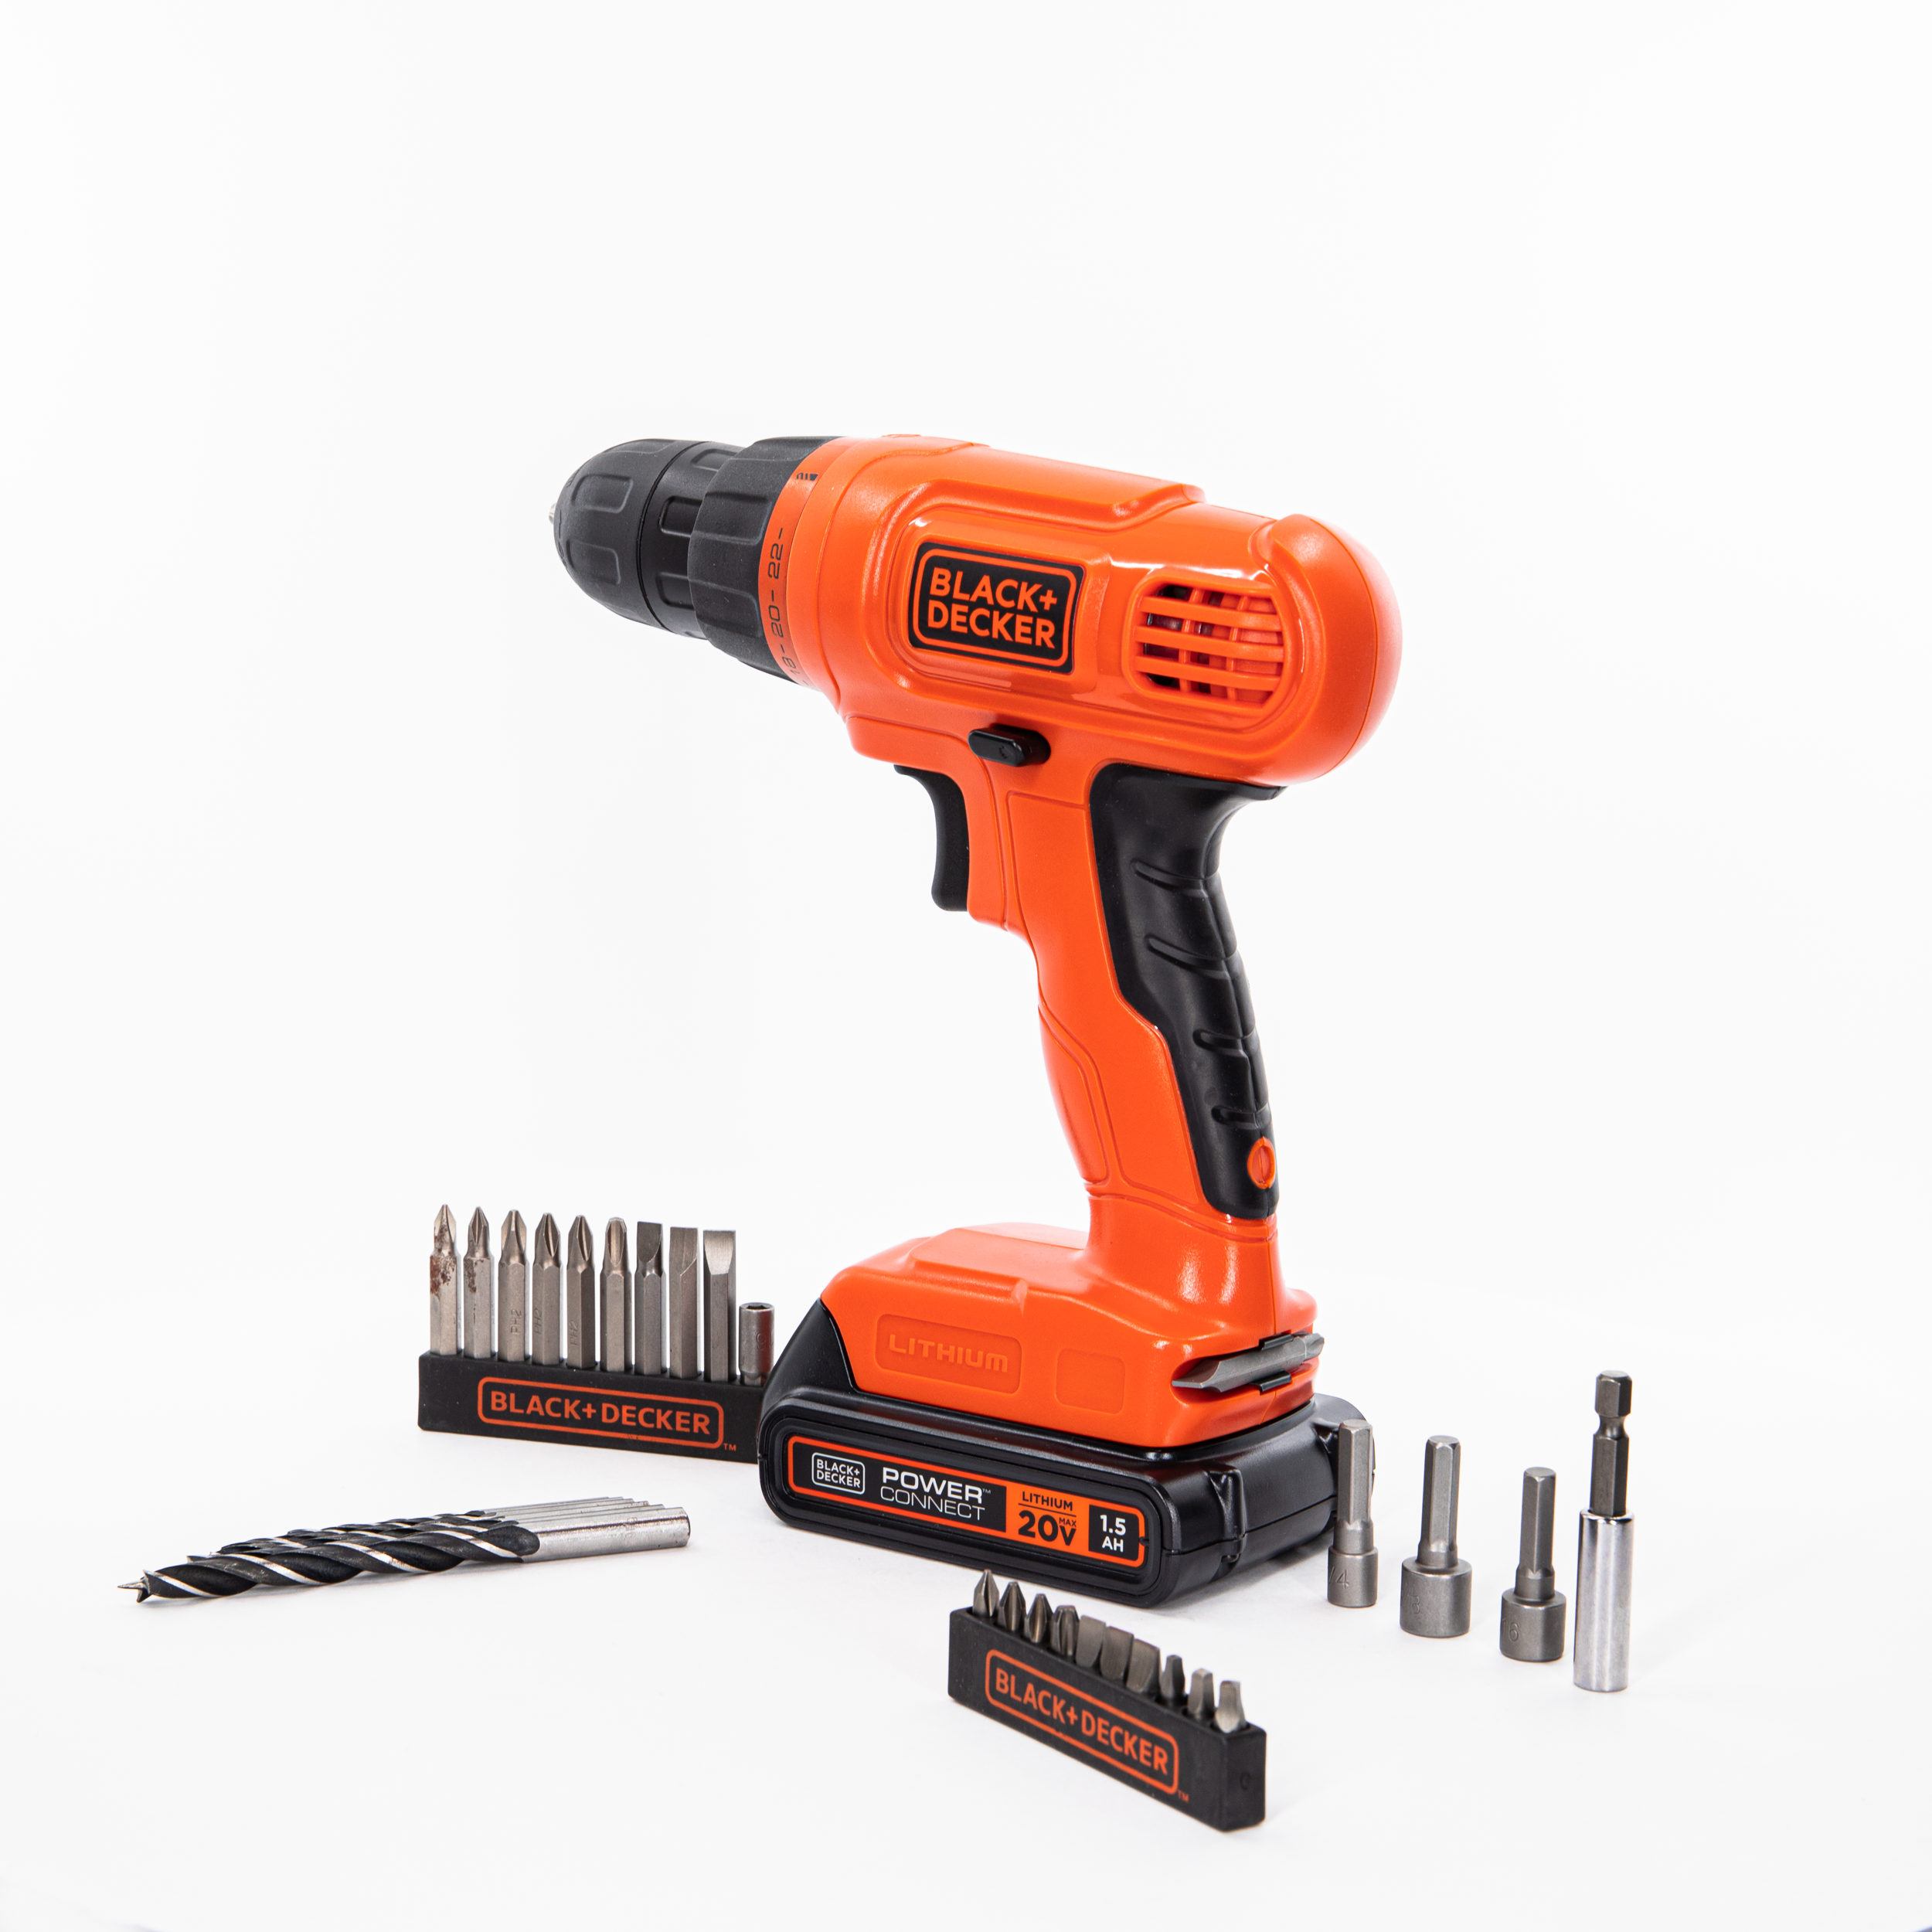 BLACK+DECKER 20V MAX POWER-CONNECT CORDLESS DRILLERDRIVER 30 PC KIT REVIEW.  